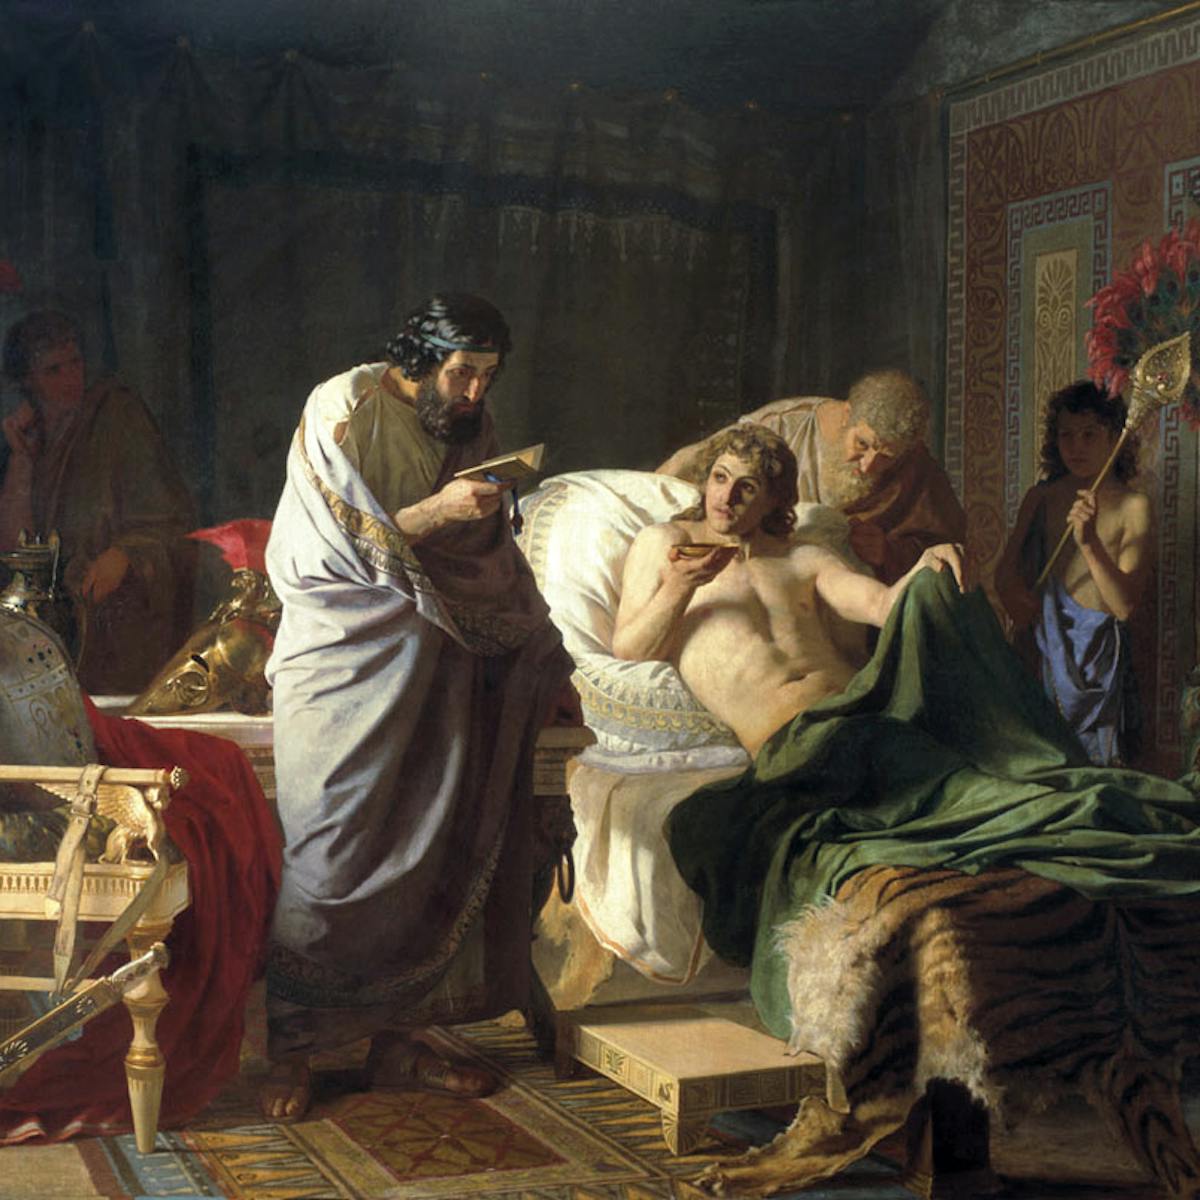 Five things the ancient Greeks can teach us about medicine today